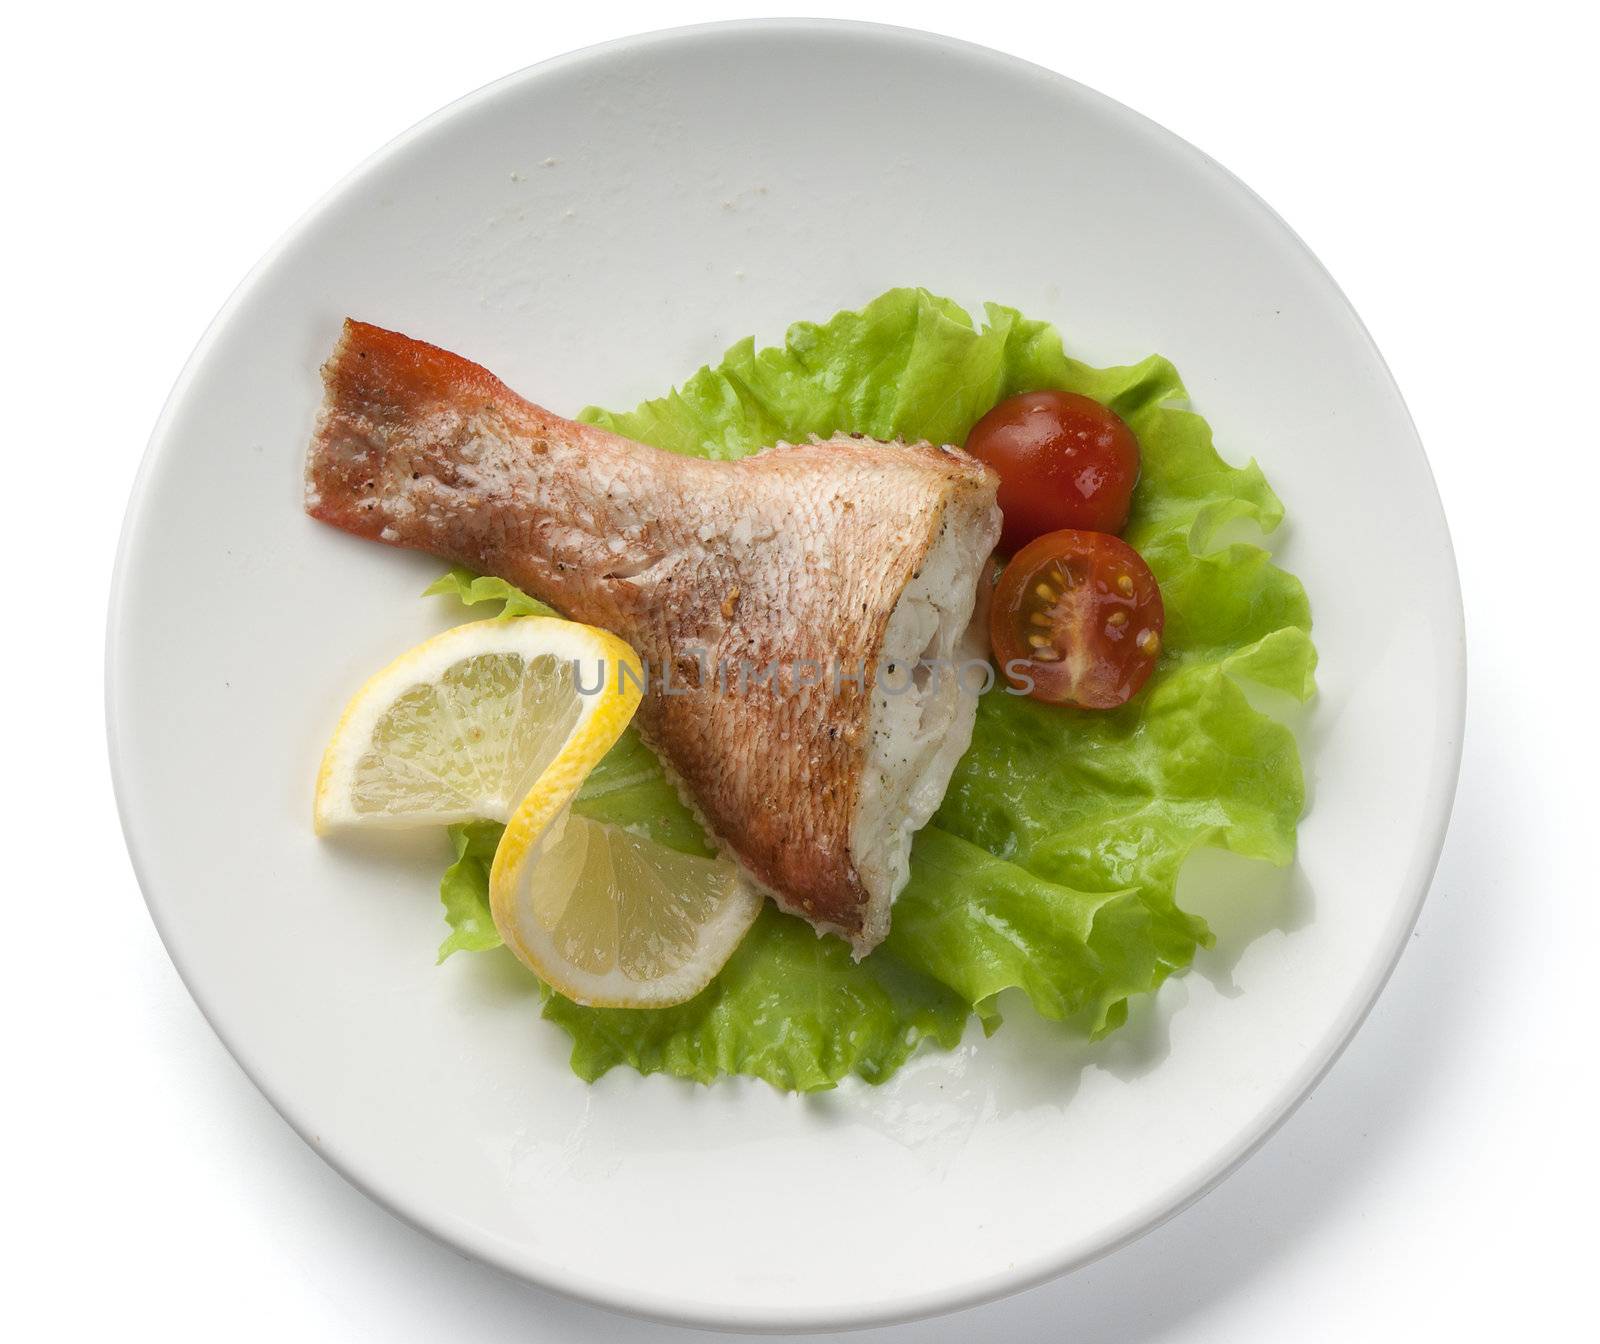 Baked rosefish with lettuce, tomato and lemon on the plate